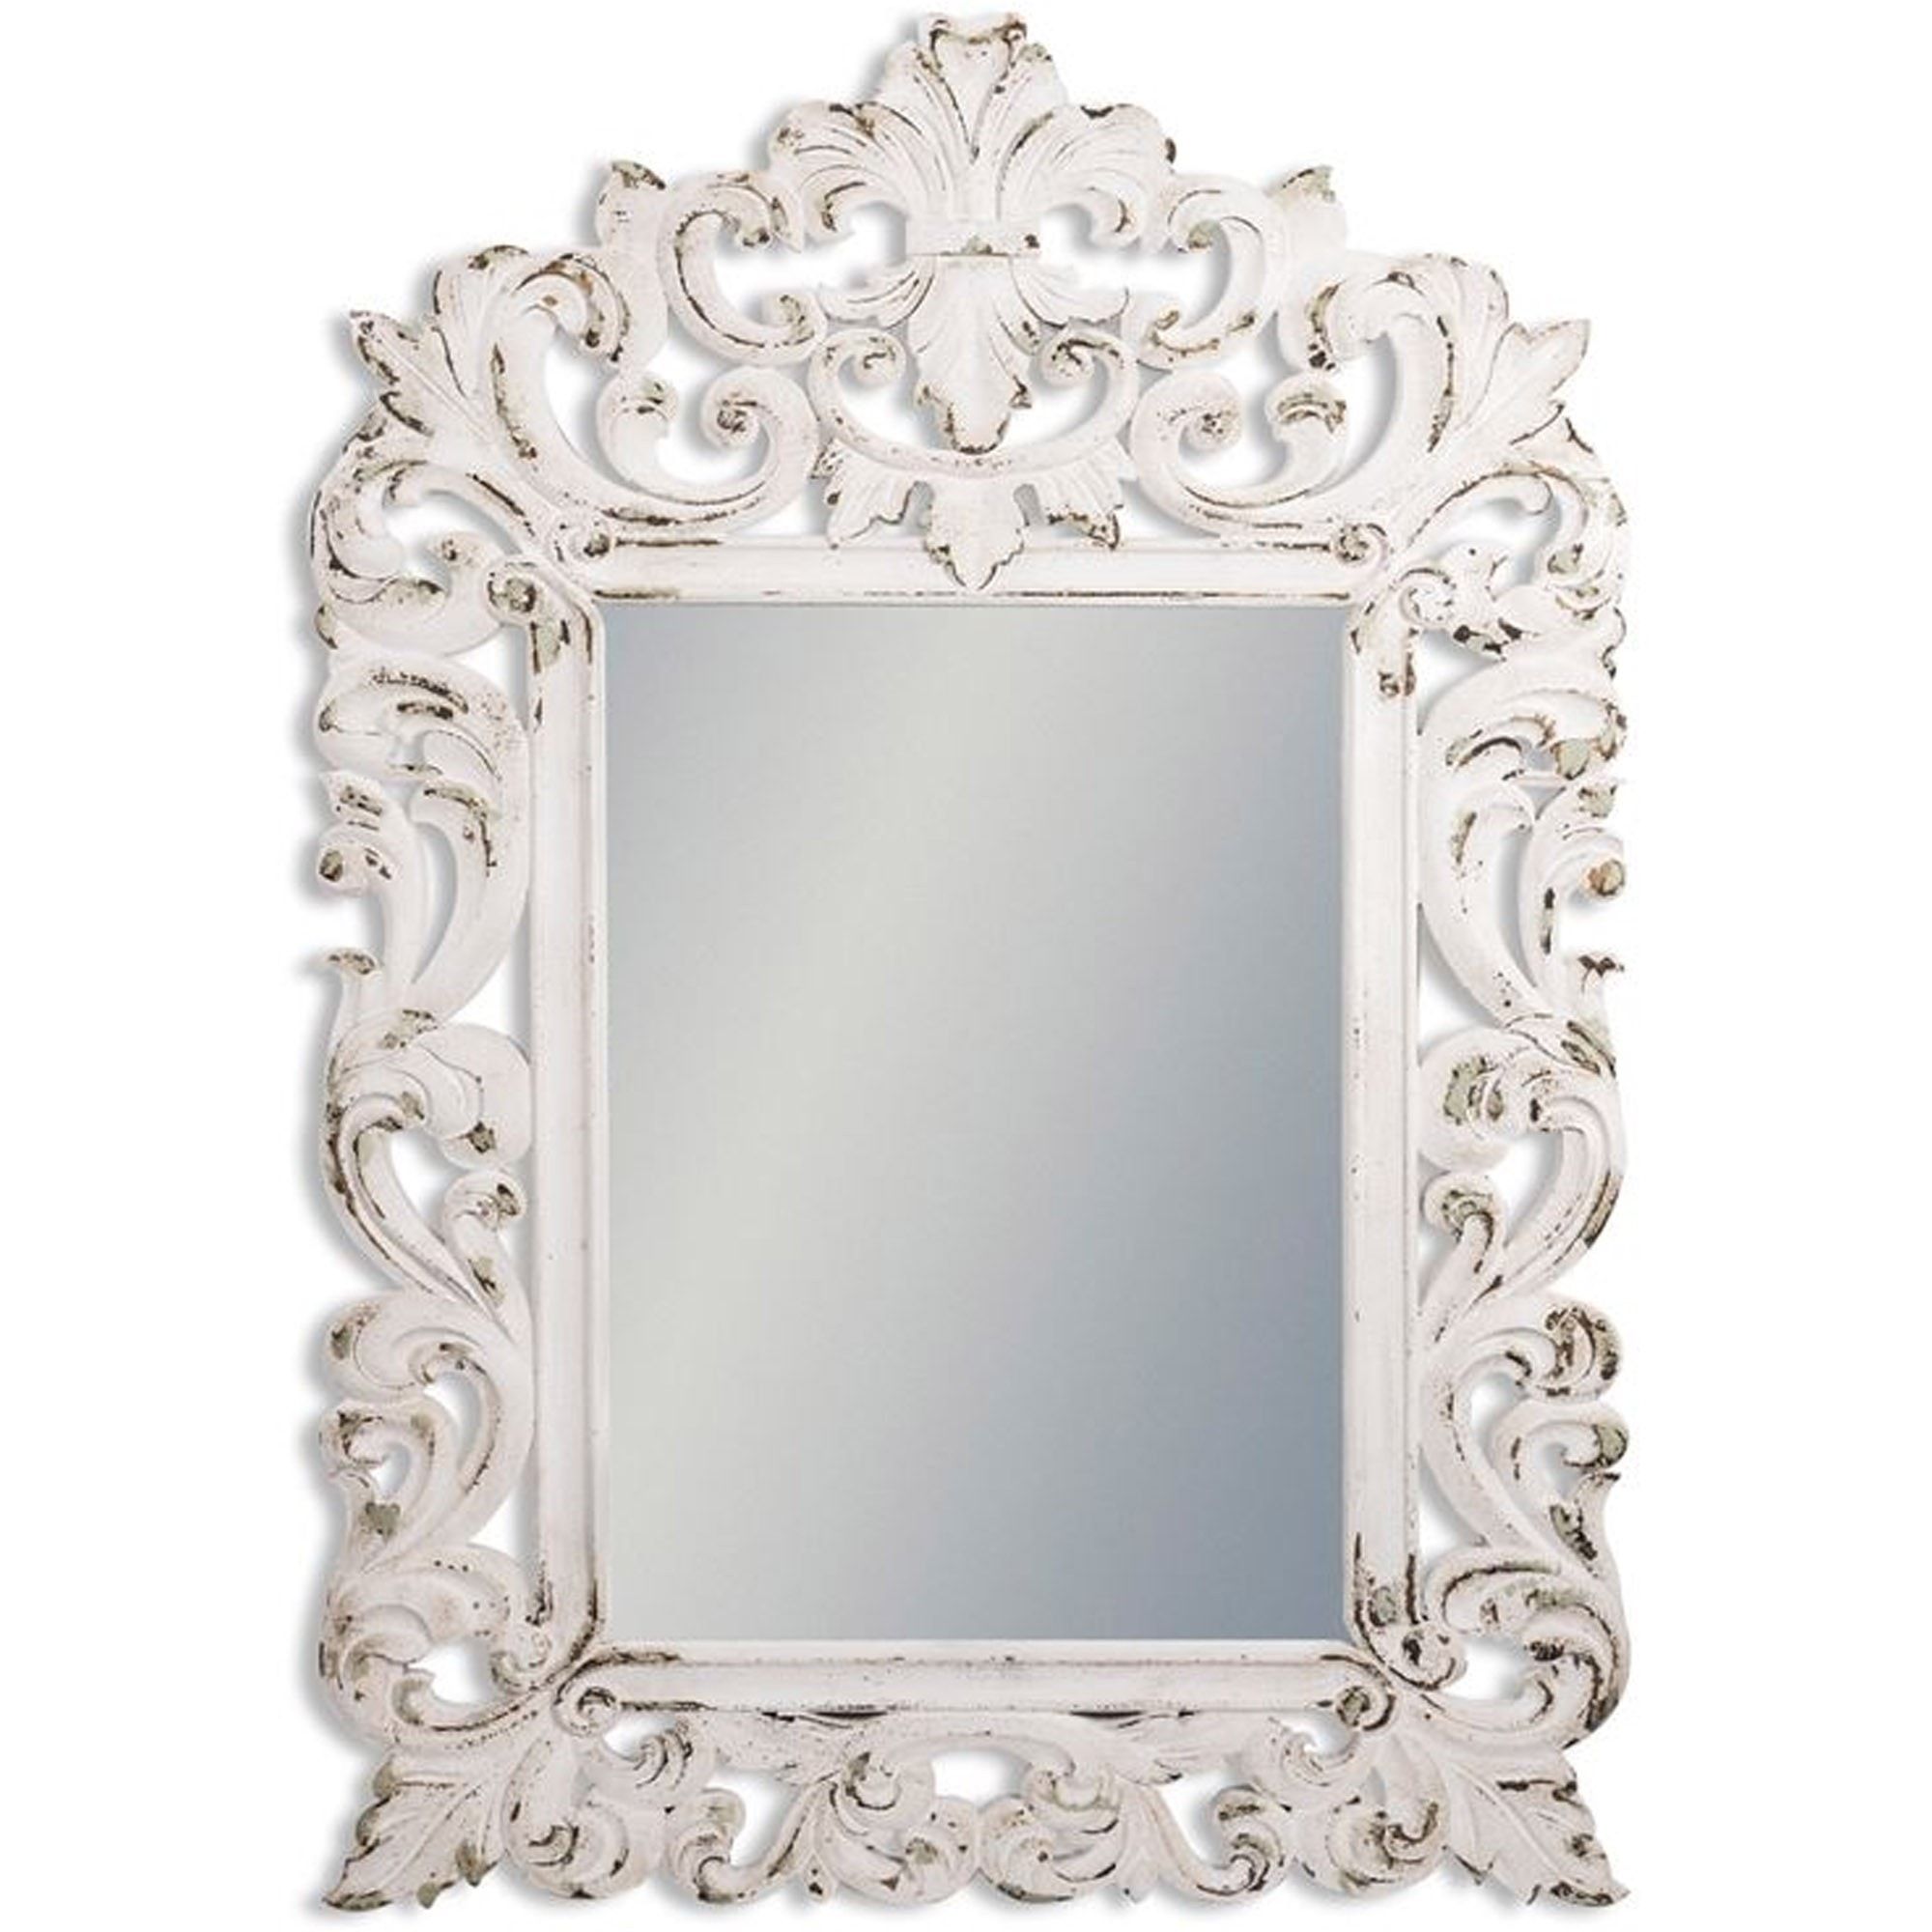 Rustic Chantilly White Large Carved Wall Mirror | White Wall Mirror For Wall Mirrors (View 7 of 15)